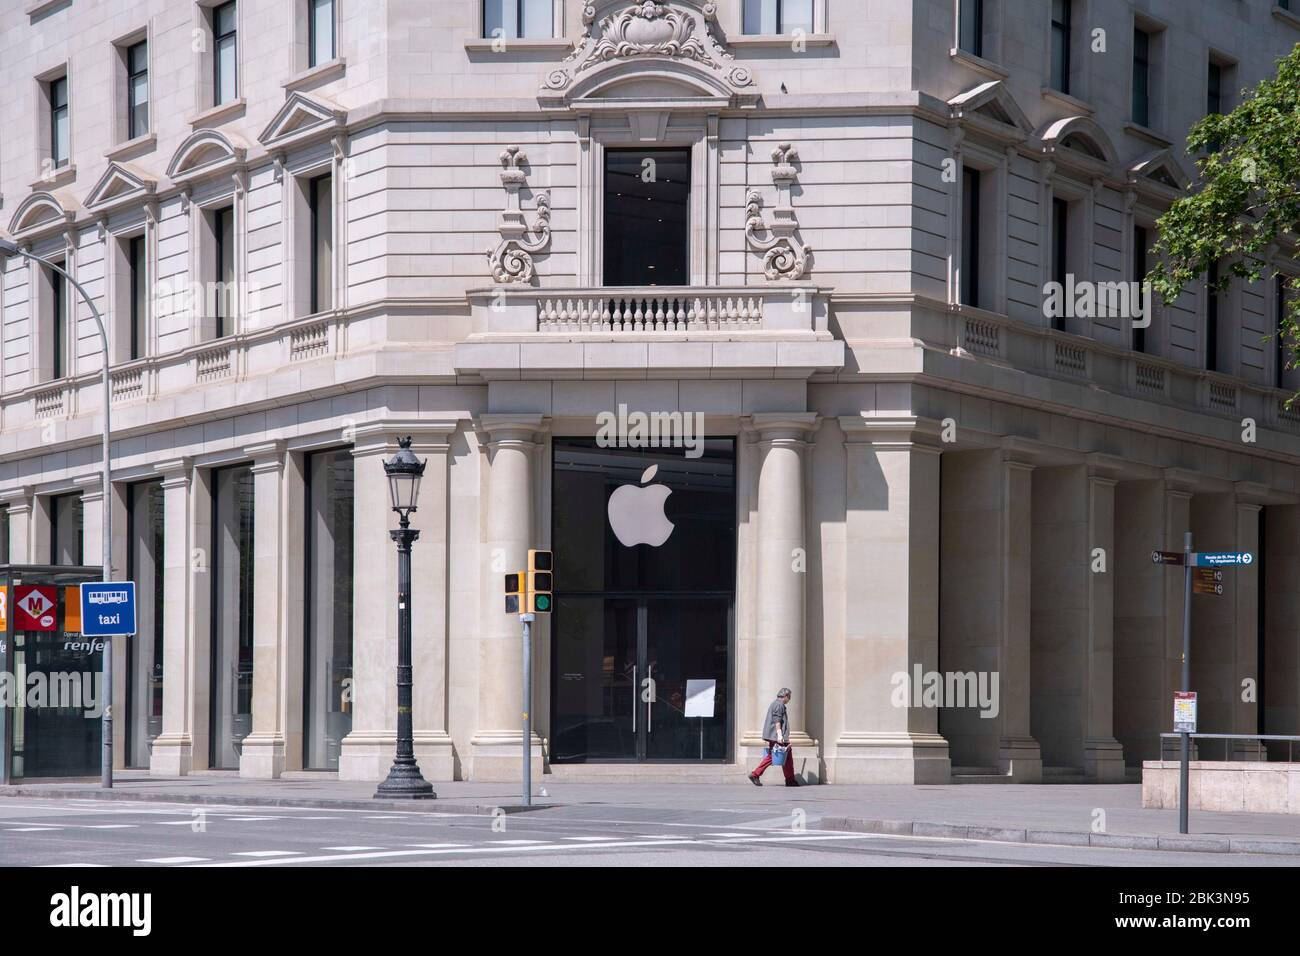 Barcelona, Spain. 30th Apr, 2020. Closed Apple store of Plaza de Catalunya in Barcelona, Spain on April 30, 2020. The country faces the 46th day of lockdown due to the Covid-19 pandemic coronavirus. The streets are nearly empty by strict measures decreed by the government, all shops are closed except f?or basic services. (Photo by Carmen Molina/Sipa USA) Credit: Sipa USA/Alamy Live News Stock Photo